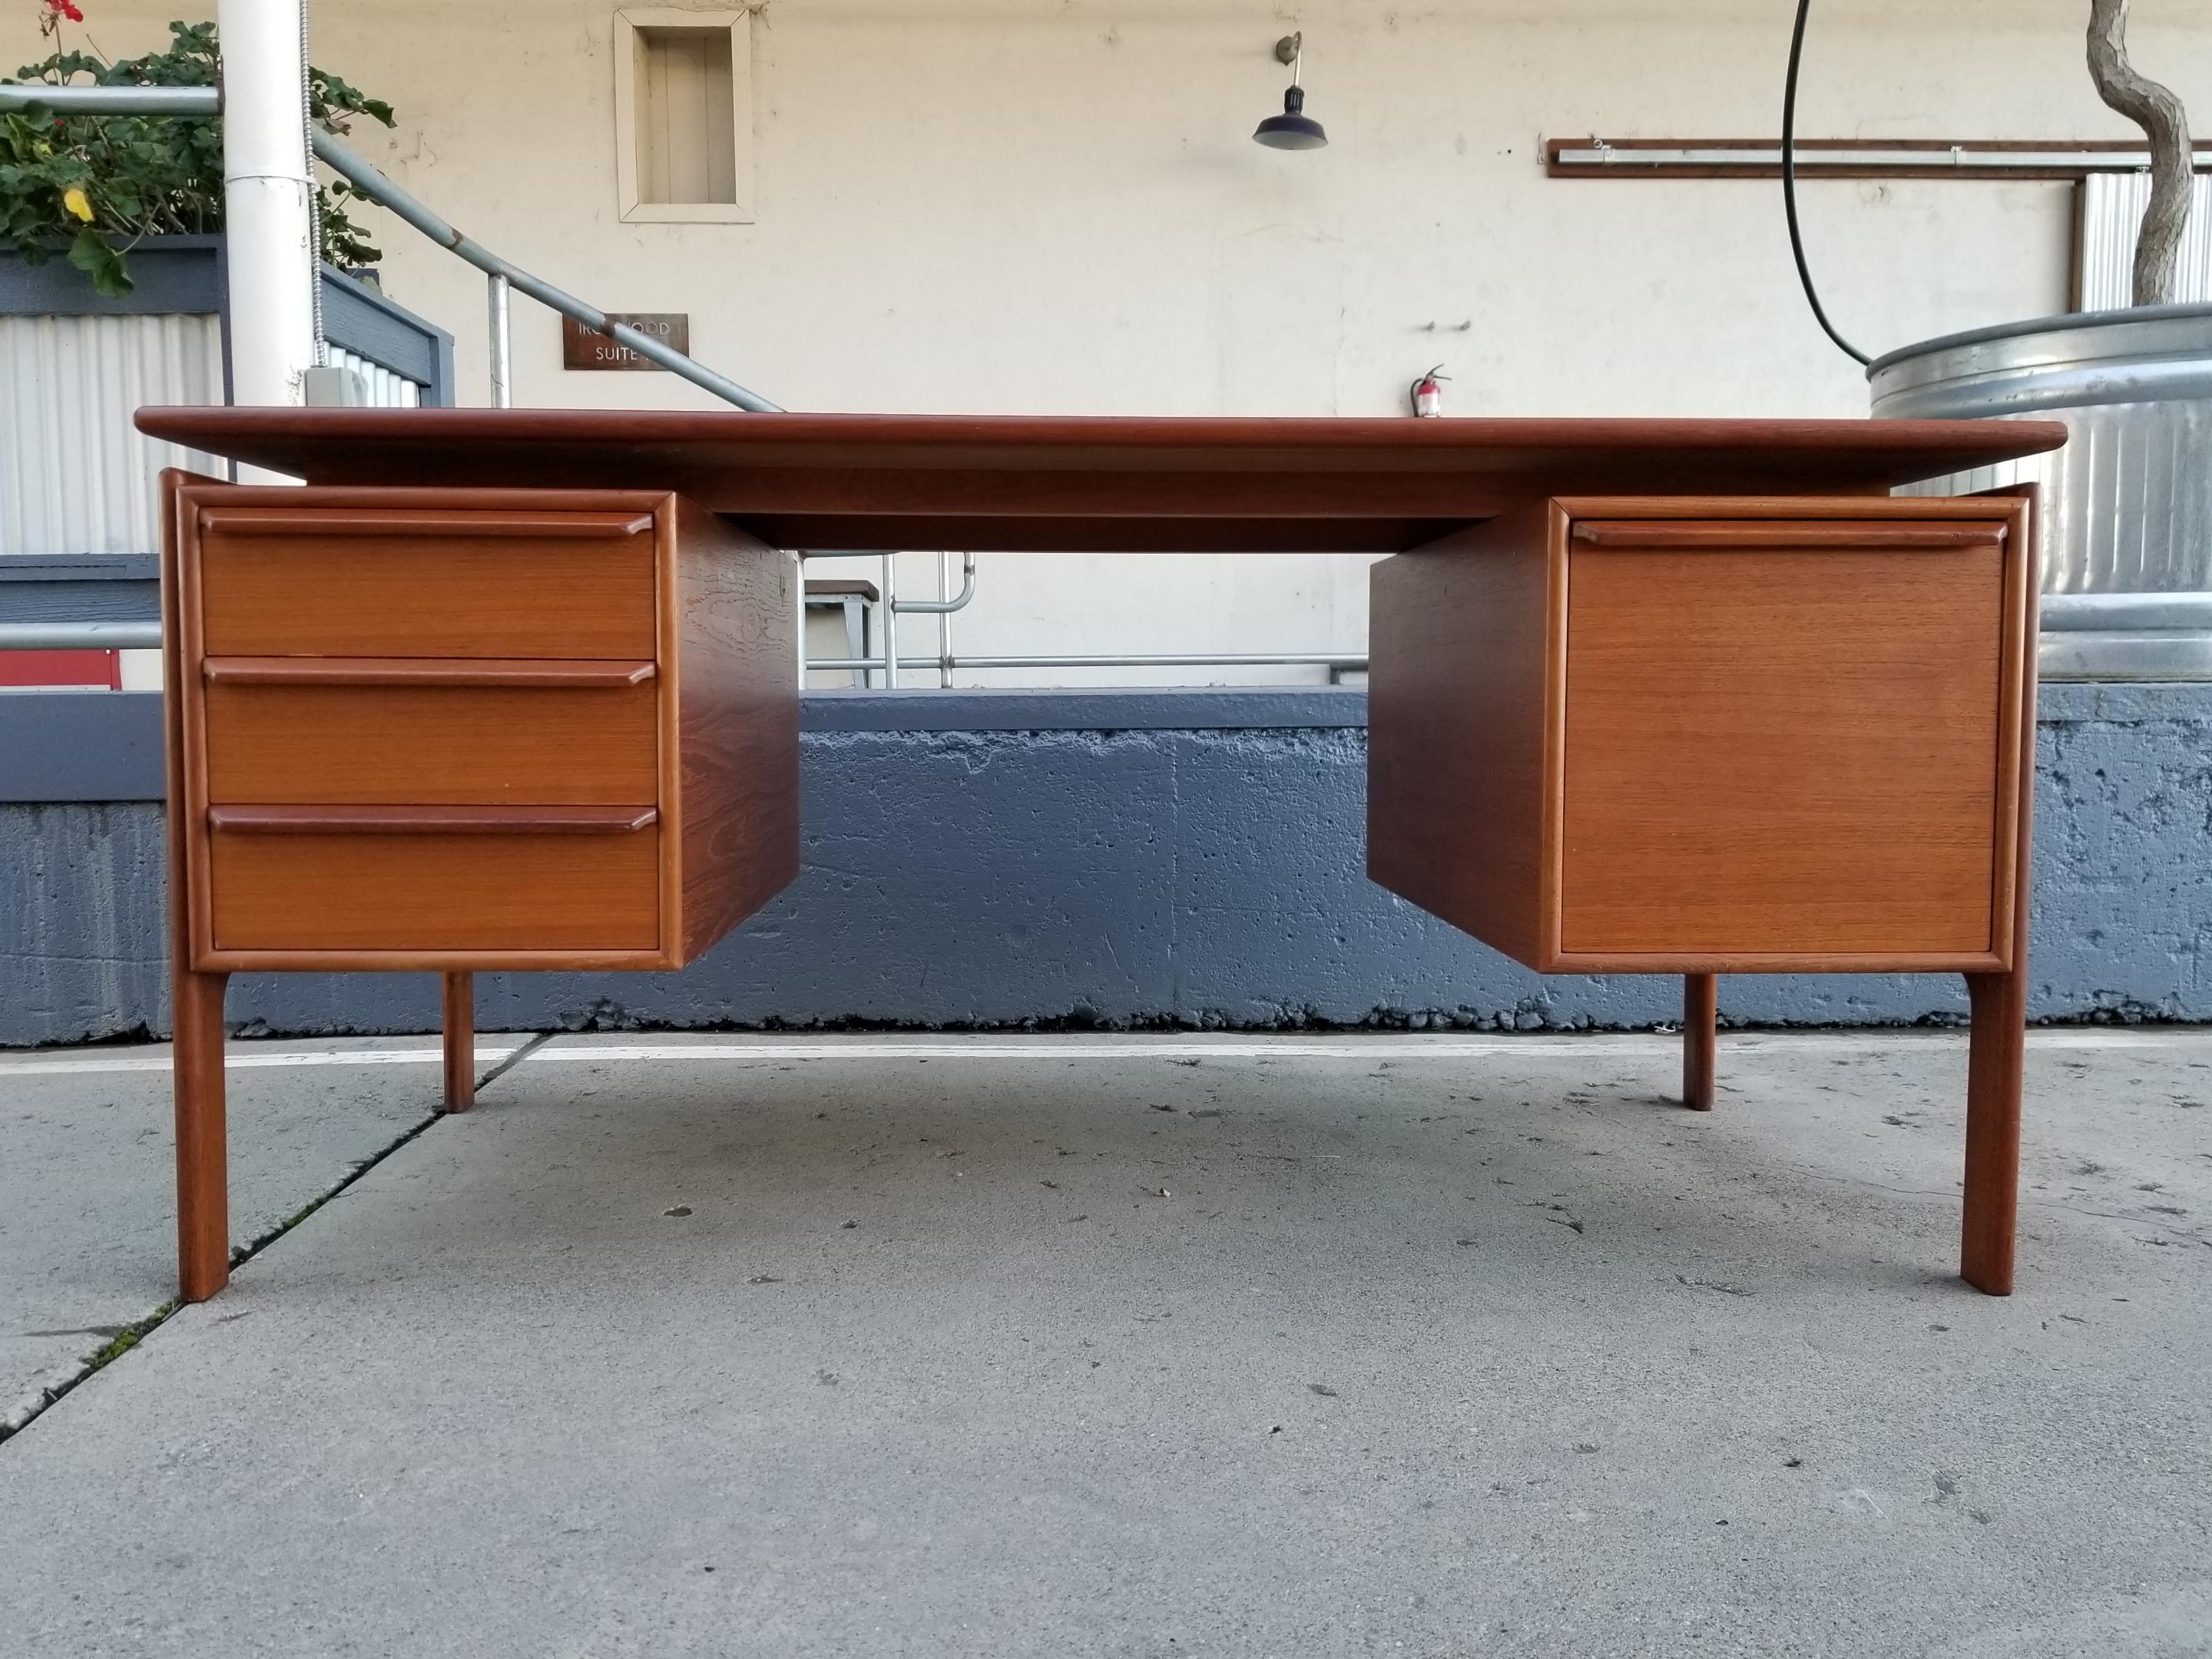 A teak Danish modern executive desk by GV Gasvig. Denmark, circa 1960s. Floating top and exoskeleton legs. Features 3 storage drawers and a file drawer. Very good original condition with original finish. Ample leg room. Knee opening measures 27